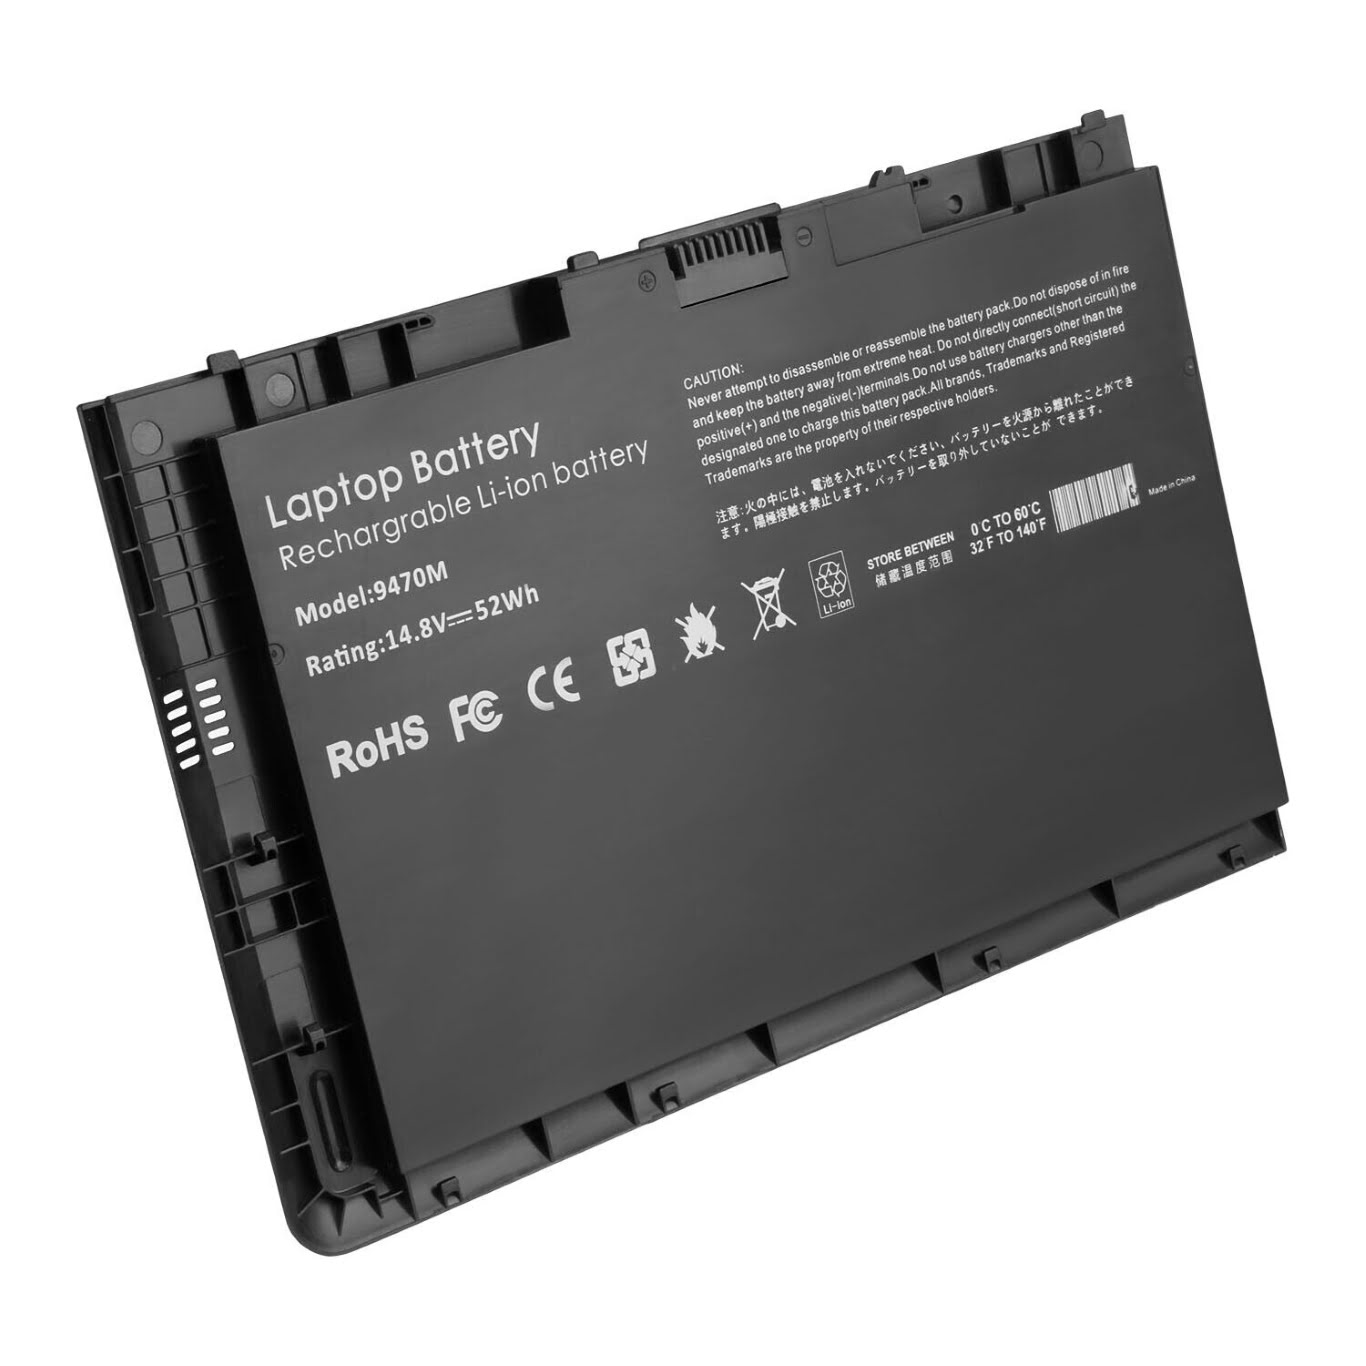 687517-171, 687517-241 replacement Laptop Battery for HP EliteBook Folio 9470 Ultrabook Series, EliteBook Folio 9470m Ultrabook Series, 14.8V, 52wh, 3 cells